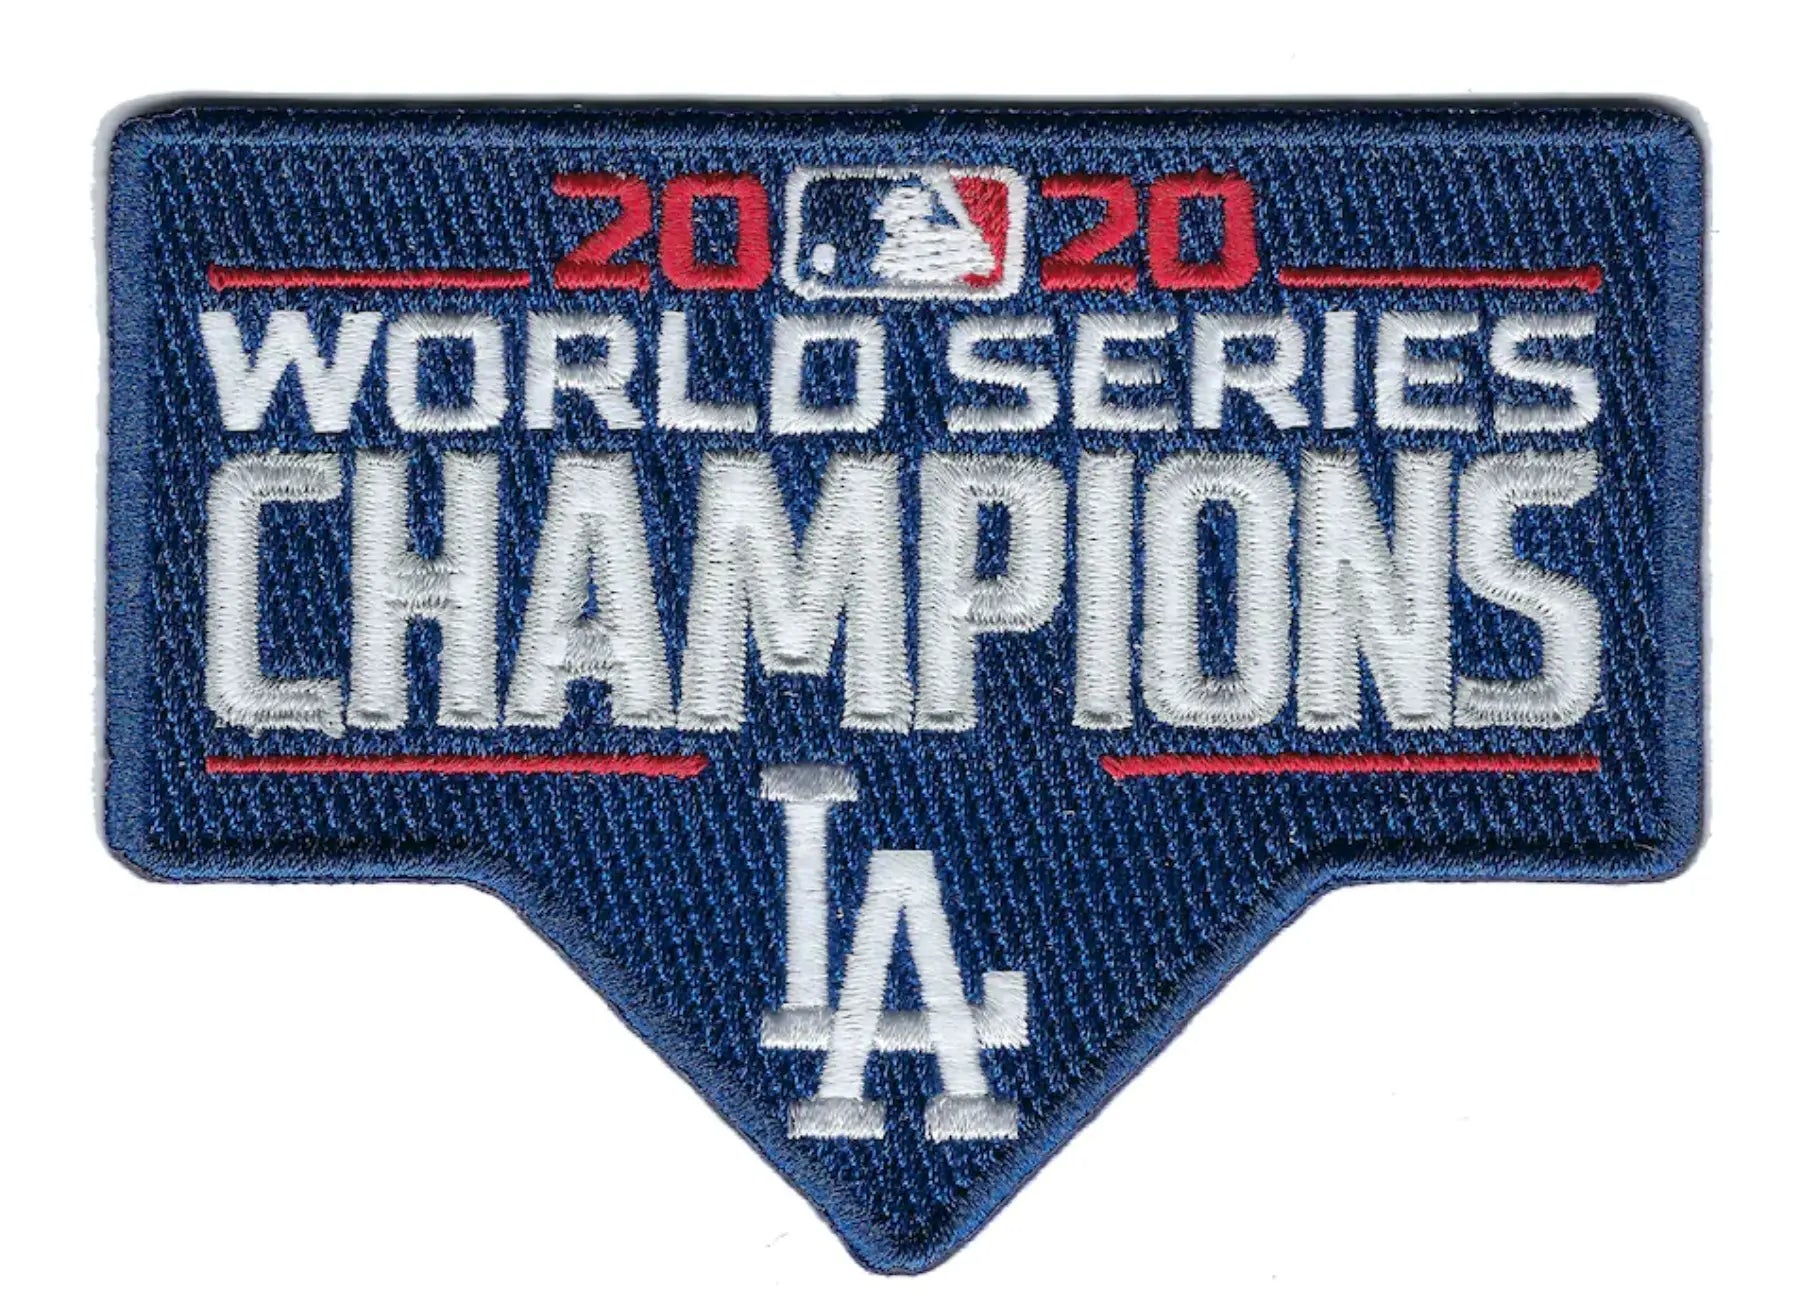 Men's Dodgers Royal Gold World Series 2020 Patch Jersey - All Stitched